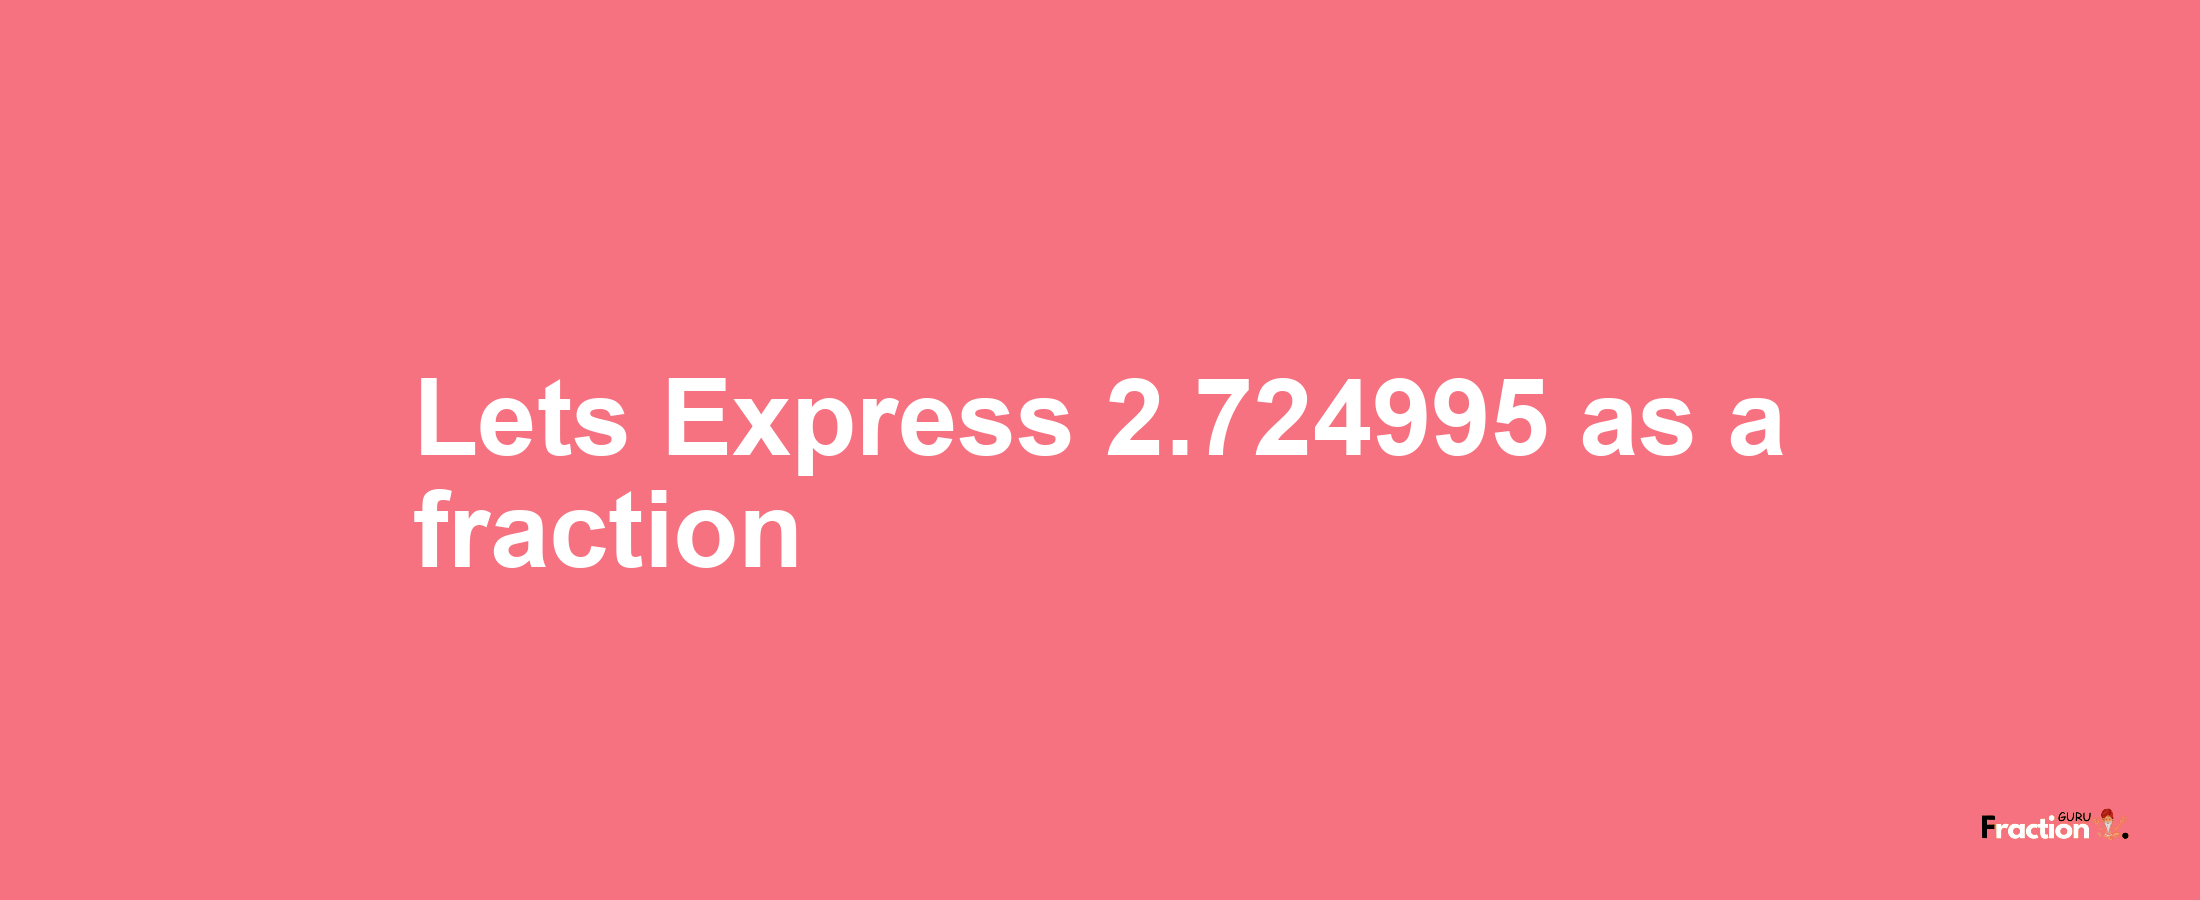 Lets Express 2.724995 as afraction